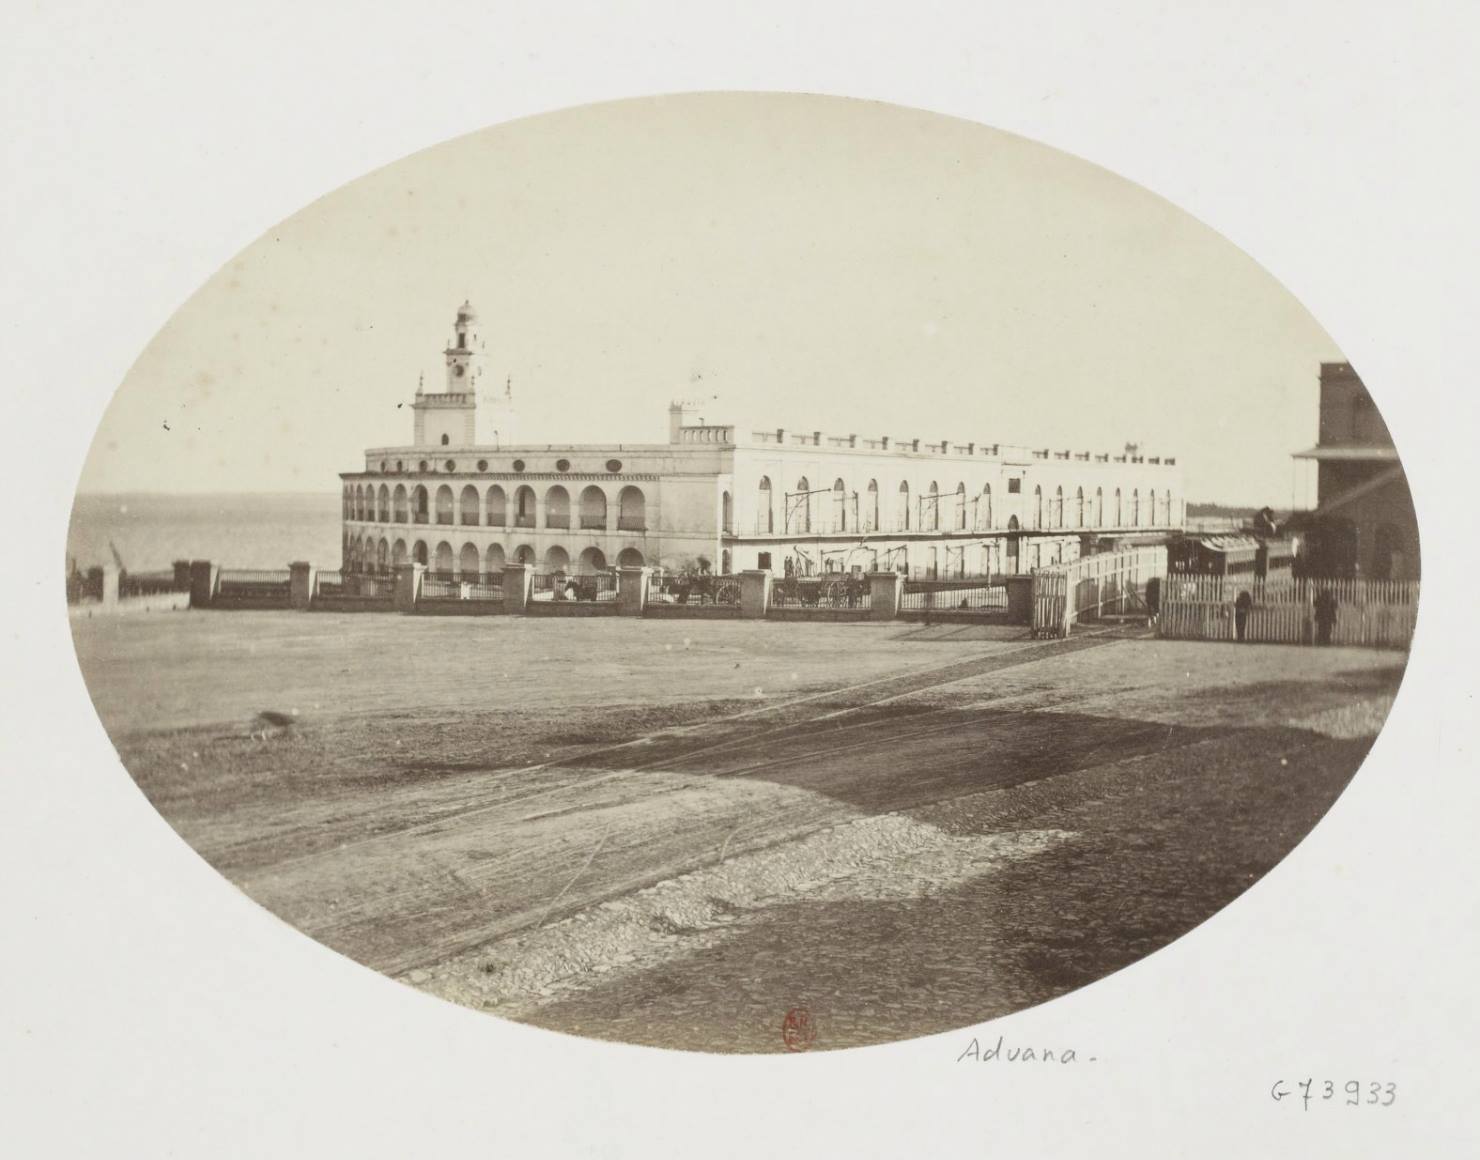 Rare Historical Photos of Buenos Aires, Argentina, from the 1870s